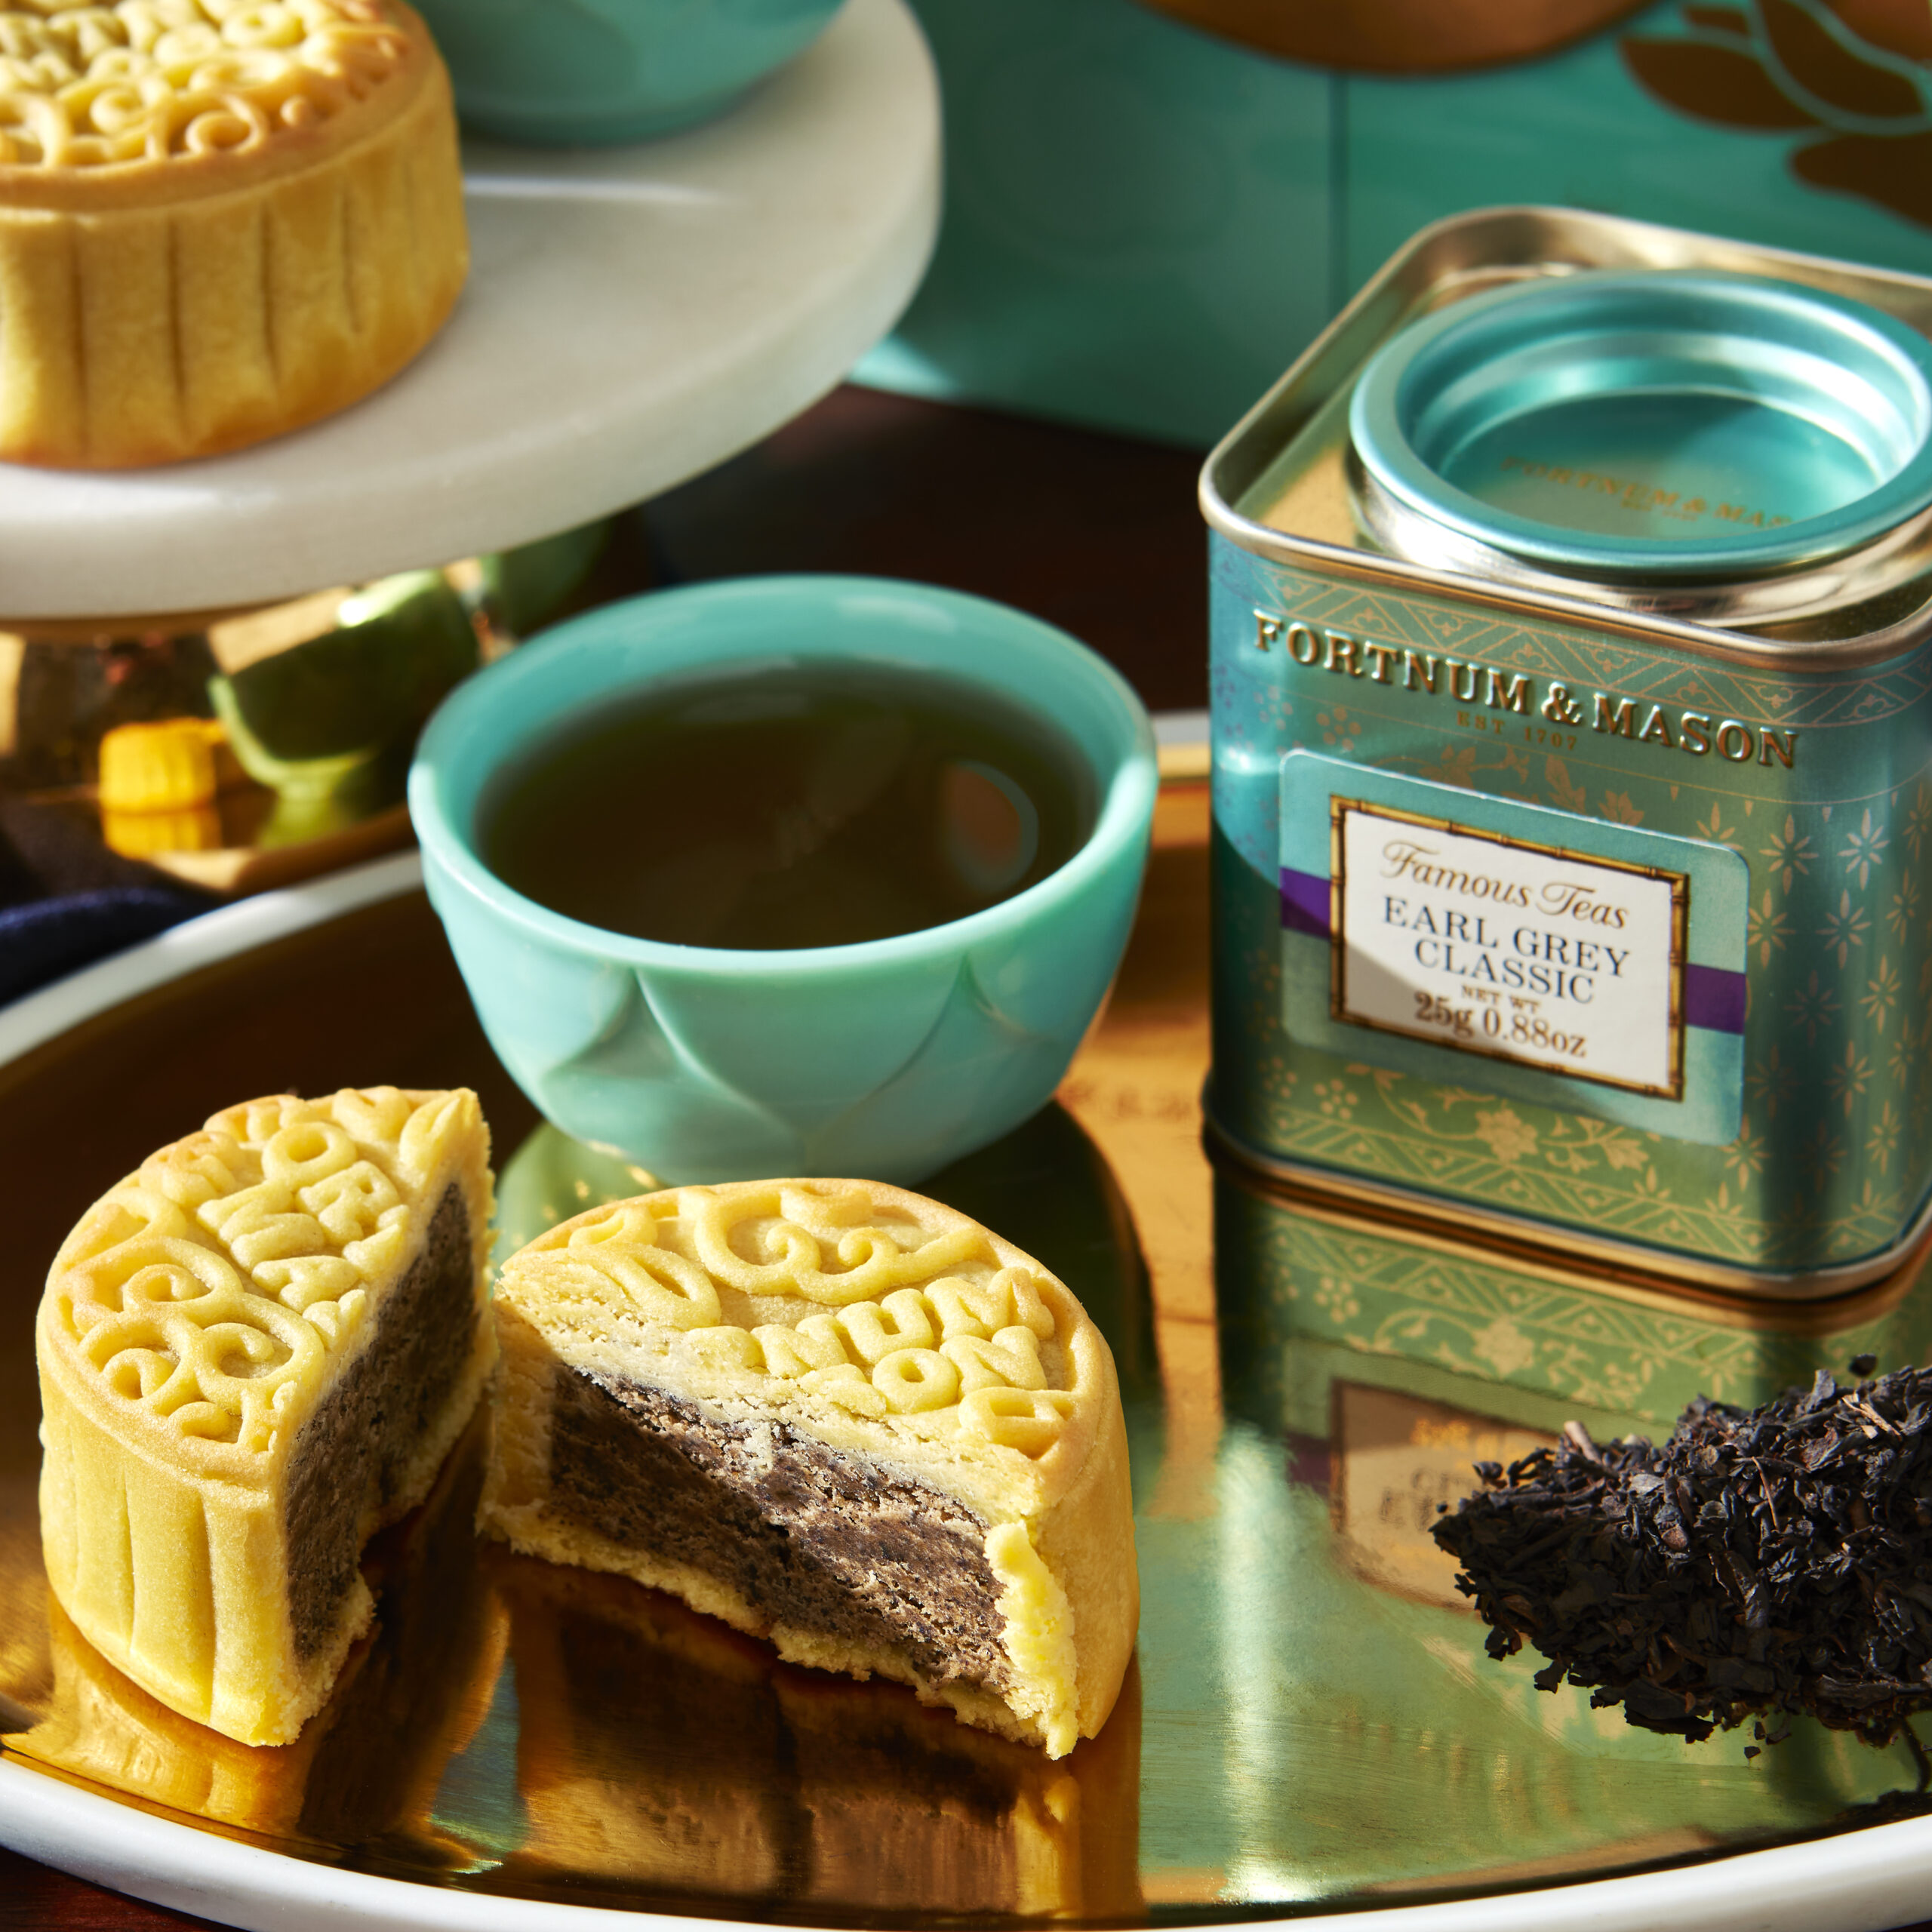 A light golden brown mooncake from Fortnum & Mason cut into half to reveal its filling sits on a tray, along with a teal cup of tea, a matching teal tin box, and tea leaves. In the background, there is a whole mooncake sitting on a stand, which is partially visible with a giftbox in the background. 